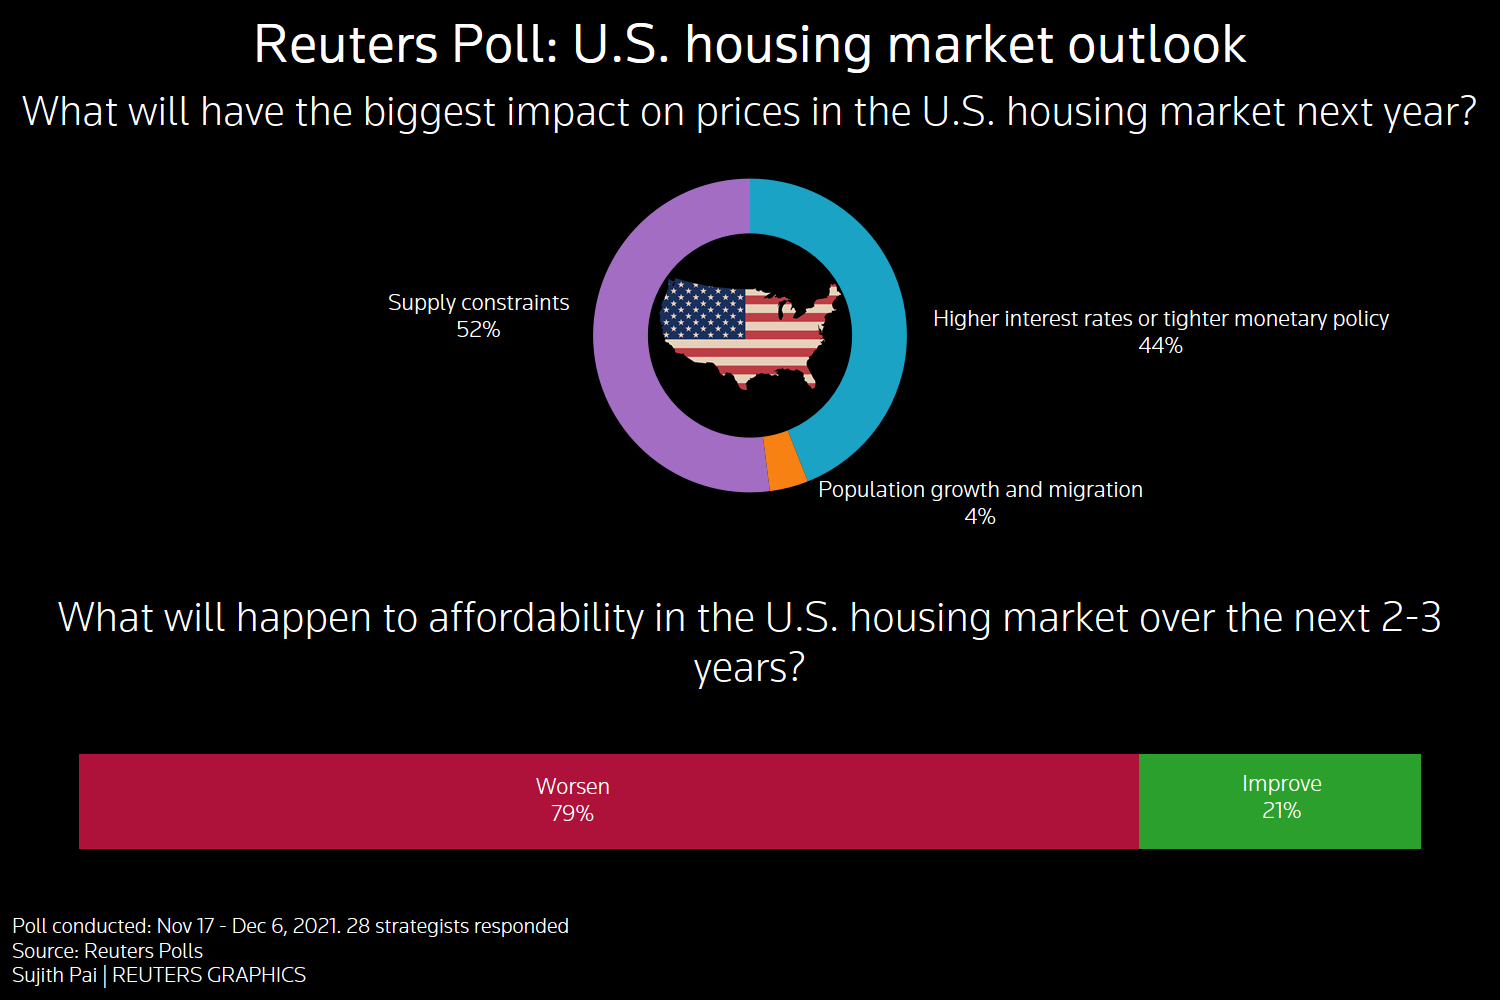 Reuters poll graphic on the U.S. housing market outlook